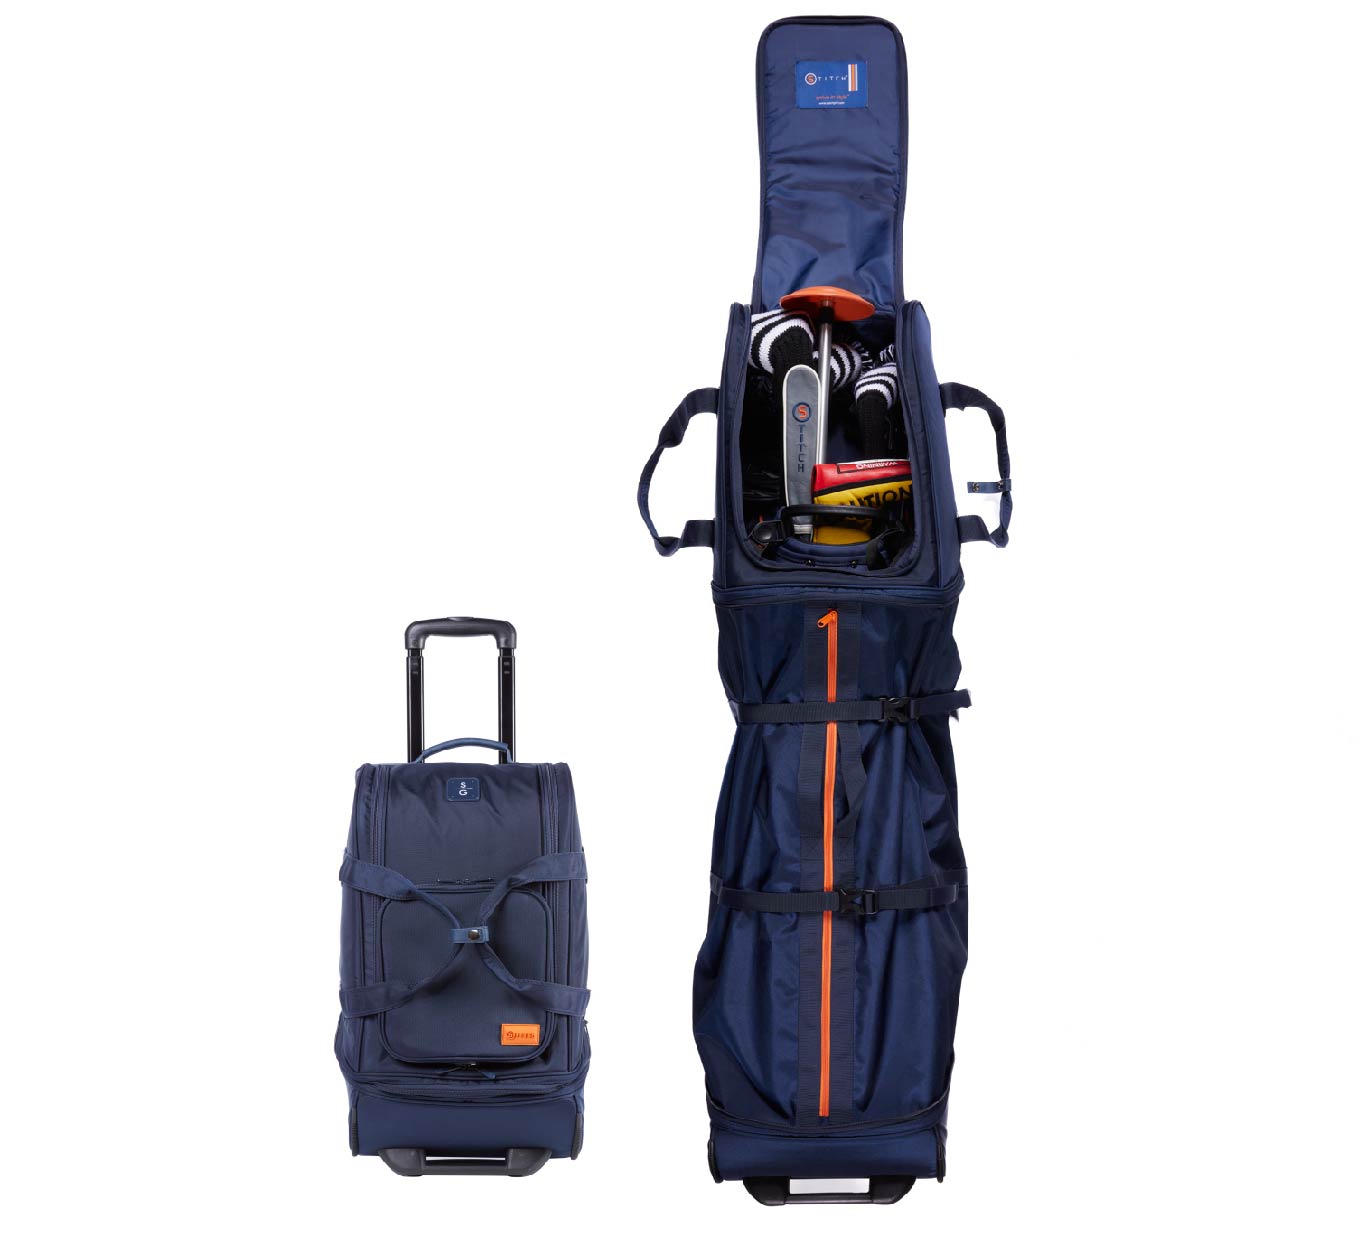 Multi Use Traveler - Midnight - Stitch Golf Travel Bag in Midnight - Arrive in Style with Our Collection of Innovative Travel Bags.